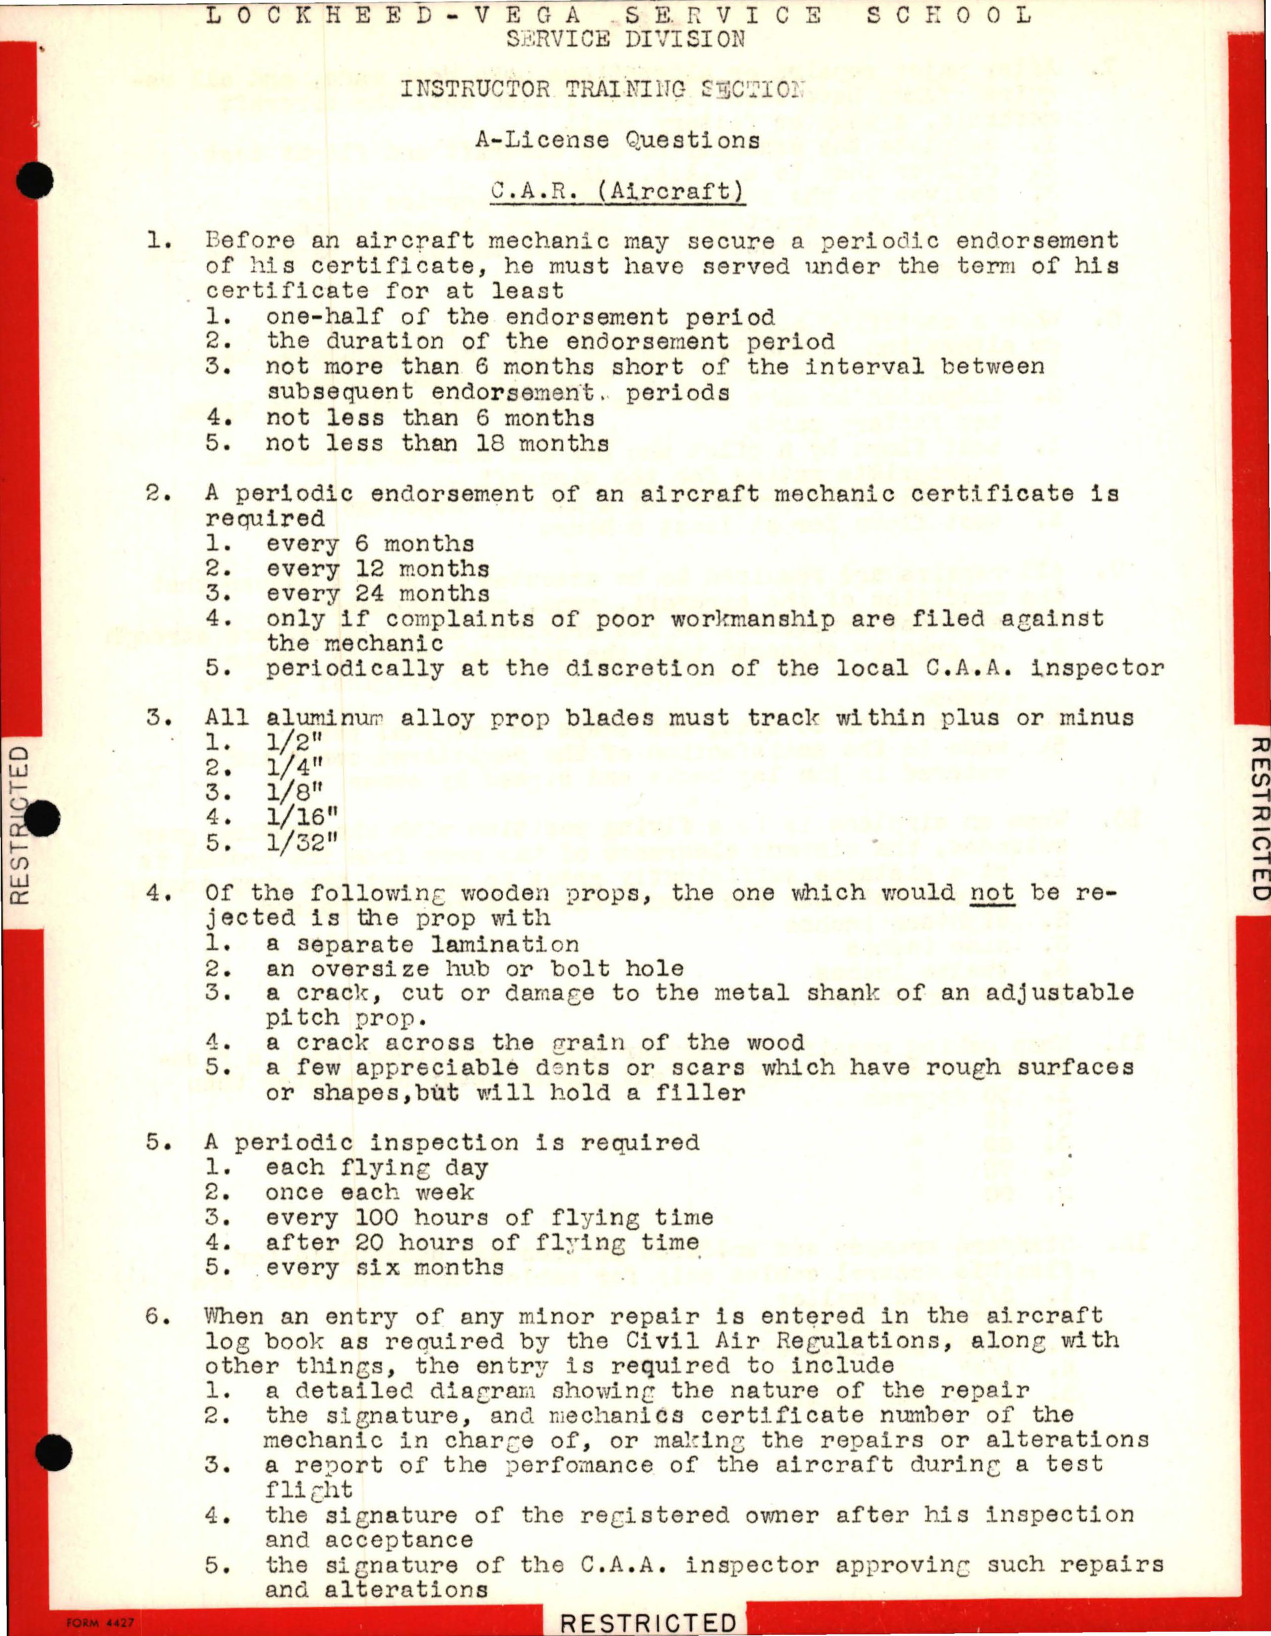 Sample page 1 from AirCorps Library document: Instructor Training Questions for C.A.R Aircraft - Lockheed-Vega Service School